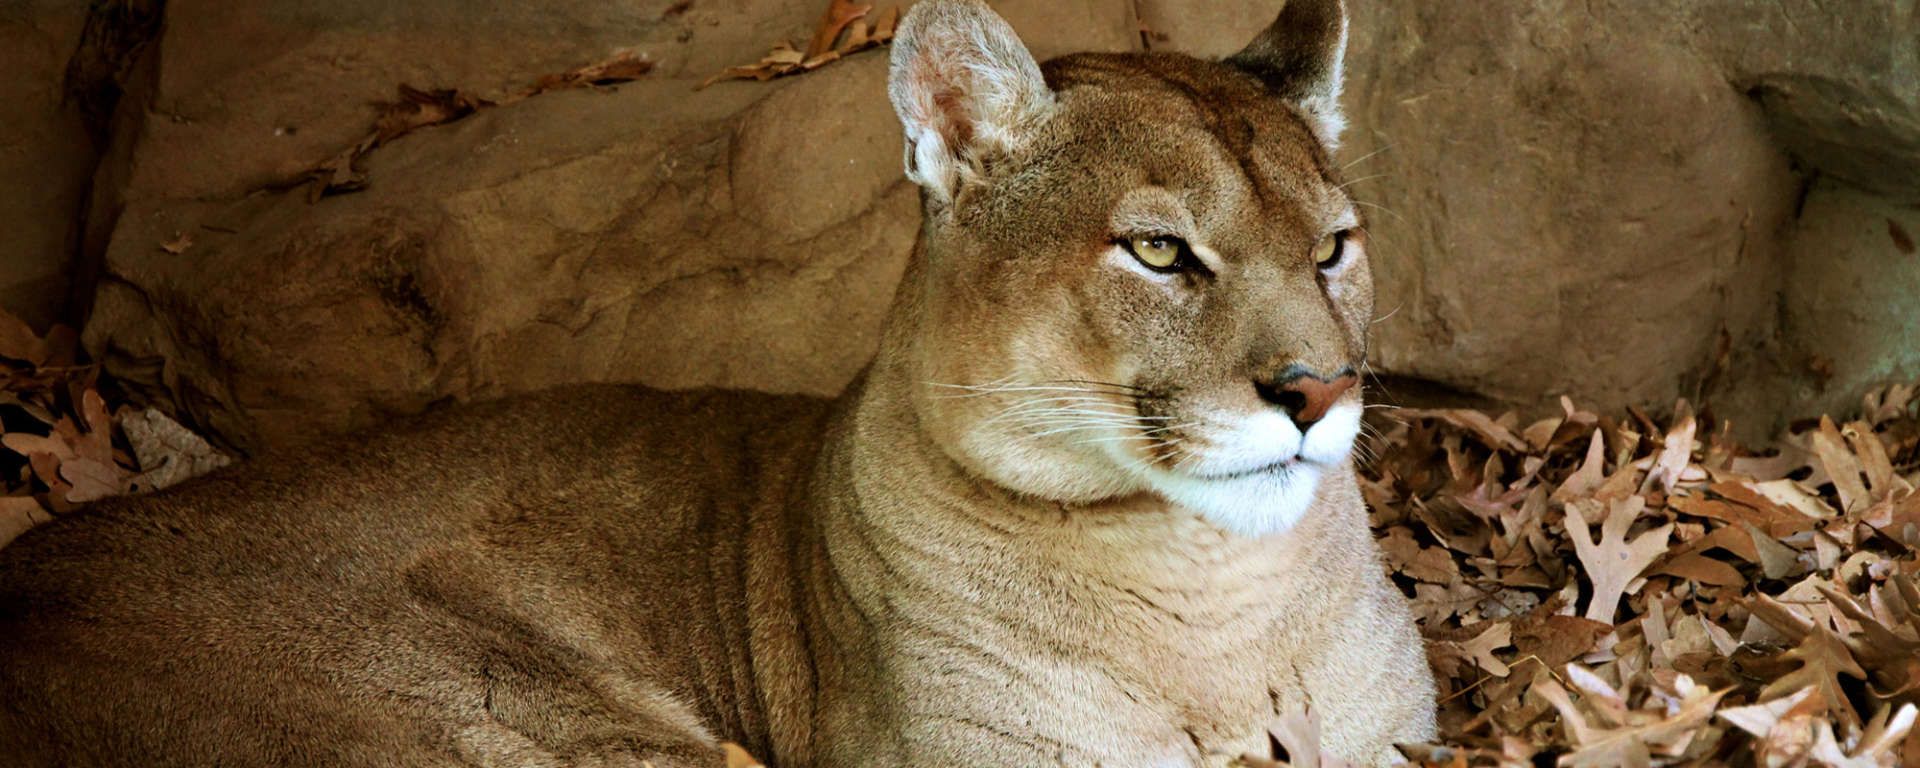 Mountain Lion for Conservation Talk